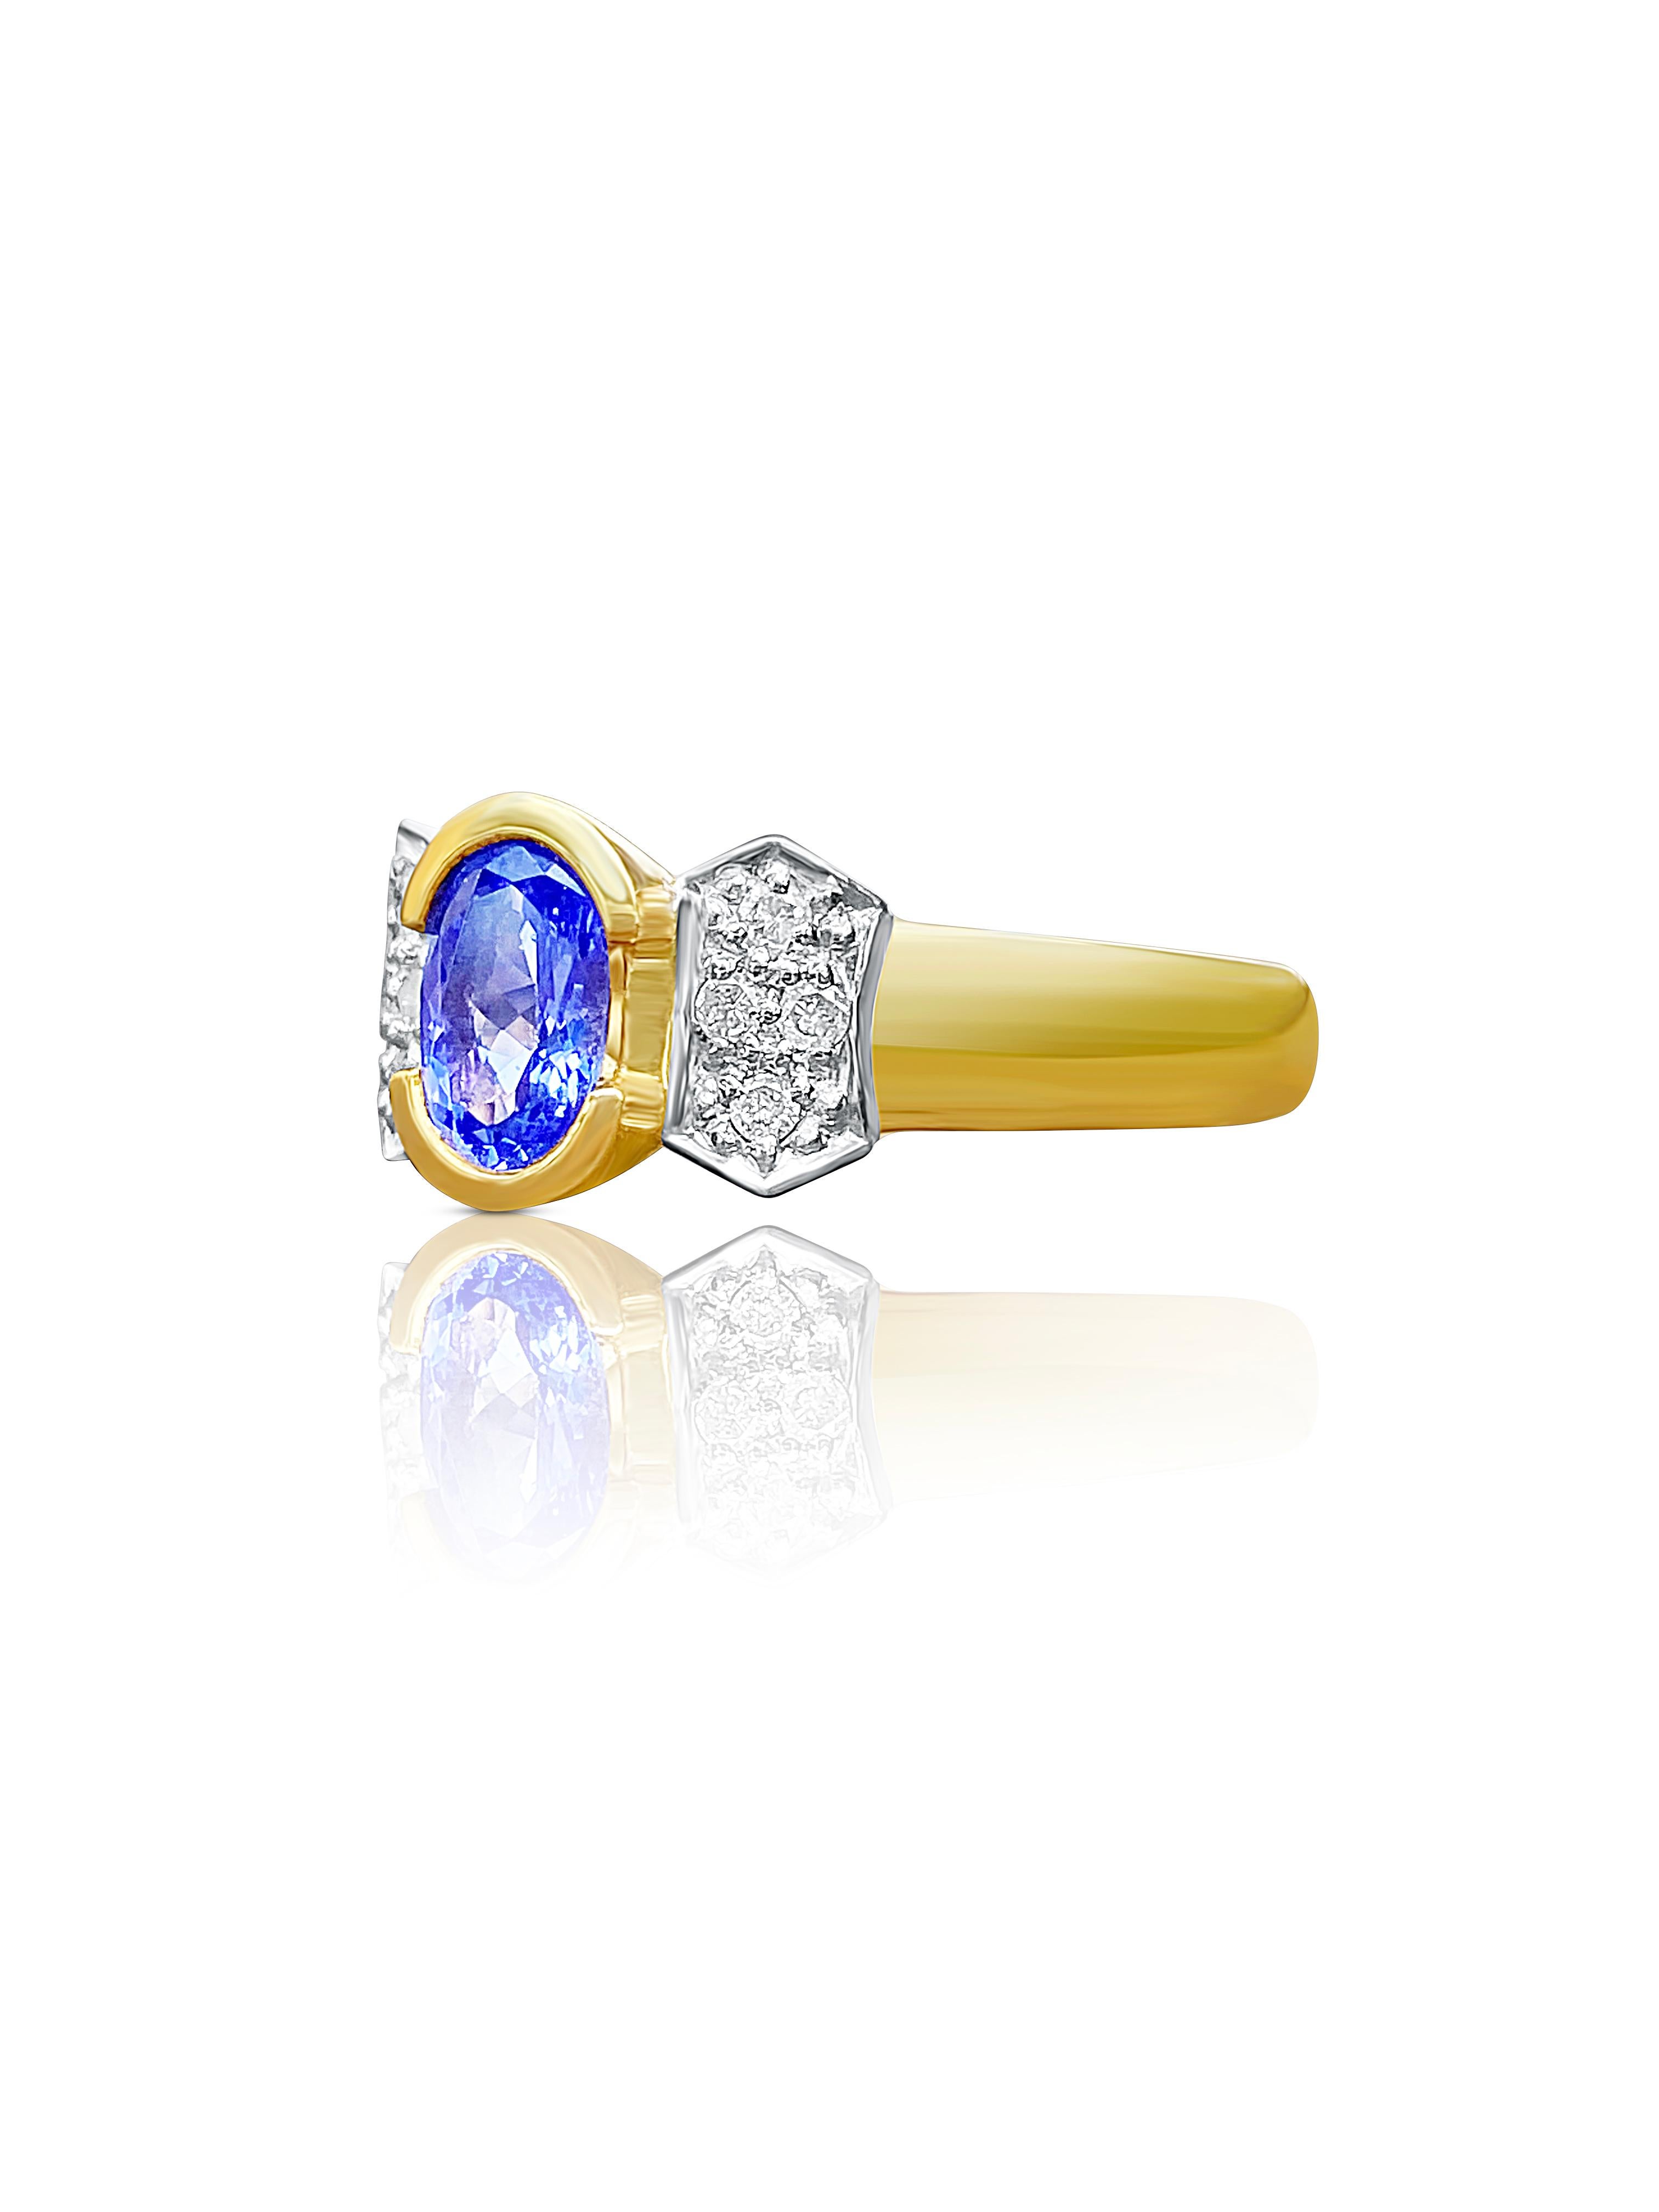 Centering a 0.78 Carat Cornflower Blue Oval-Cut Tanzanite, further accented by Round-Brilliant Cut Diamonds, and set in 14K Yellow Gold, this Vintage Ring is a must for Tanzanite connoisseurs. 

Details:
✔ Stone: Tanzanite
✔ Center-Stone Weight: